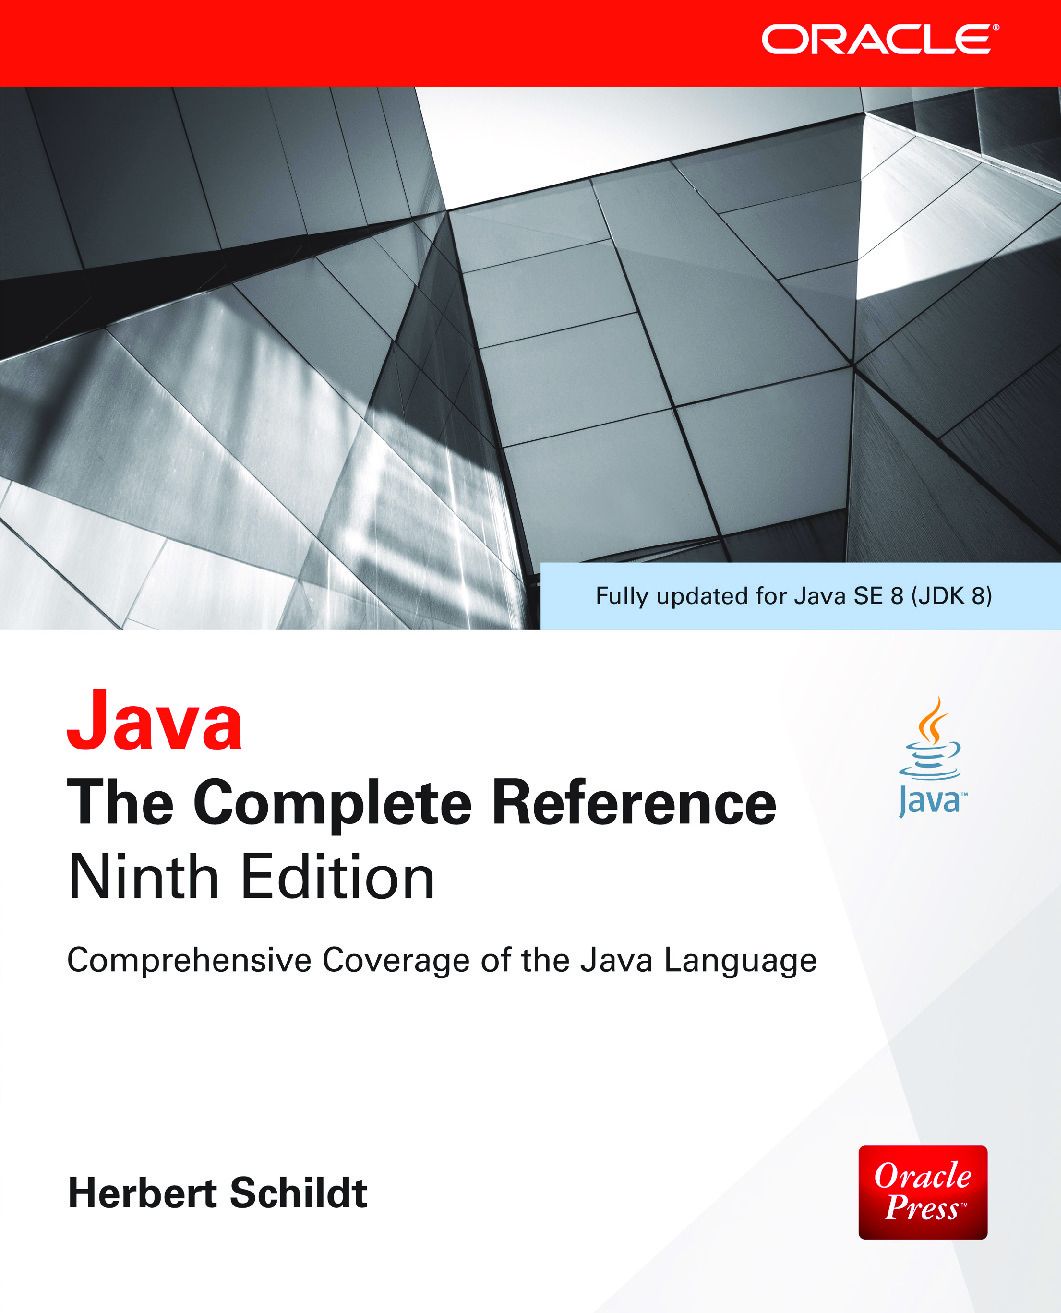 [JAVA][The Complete Reference Java Ninth Edition]